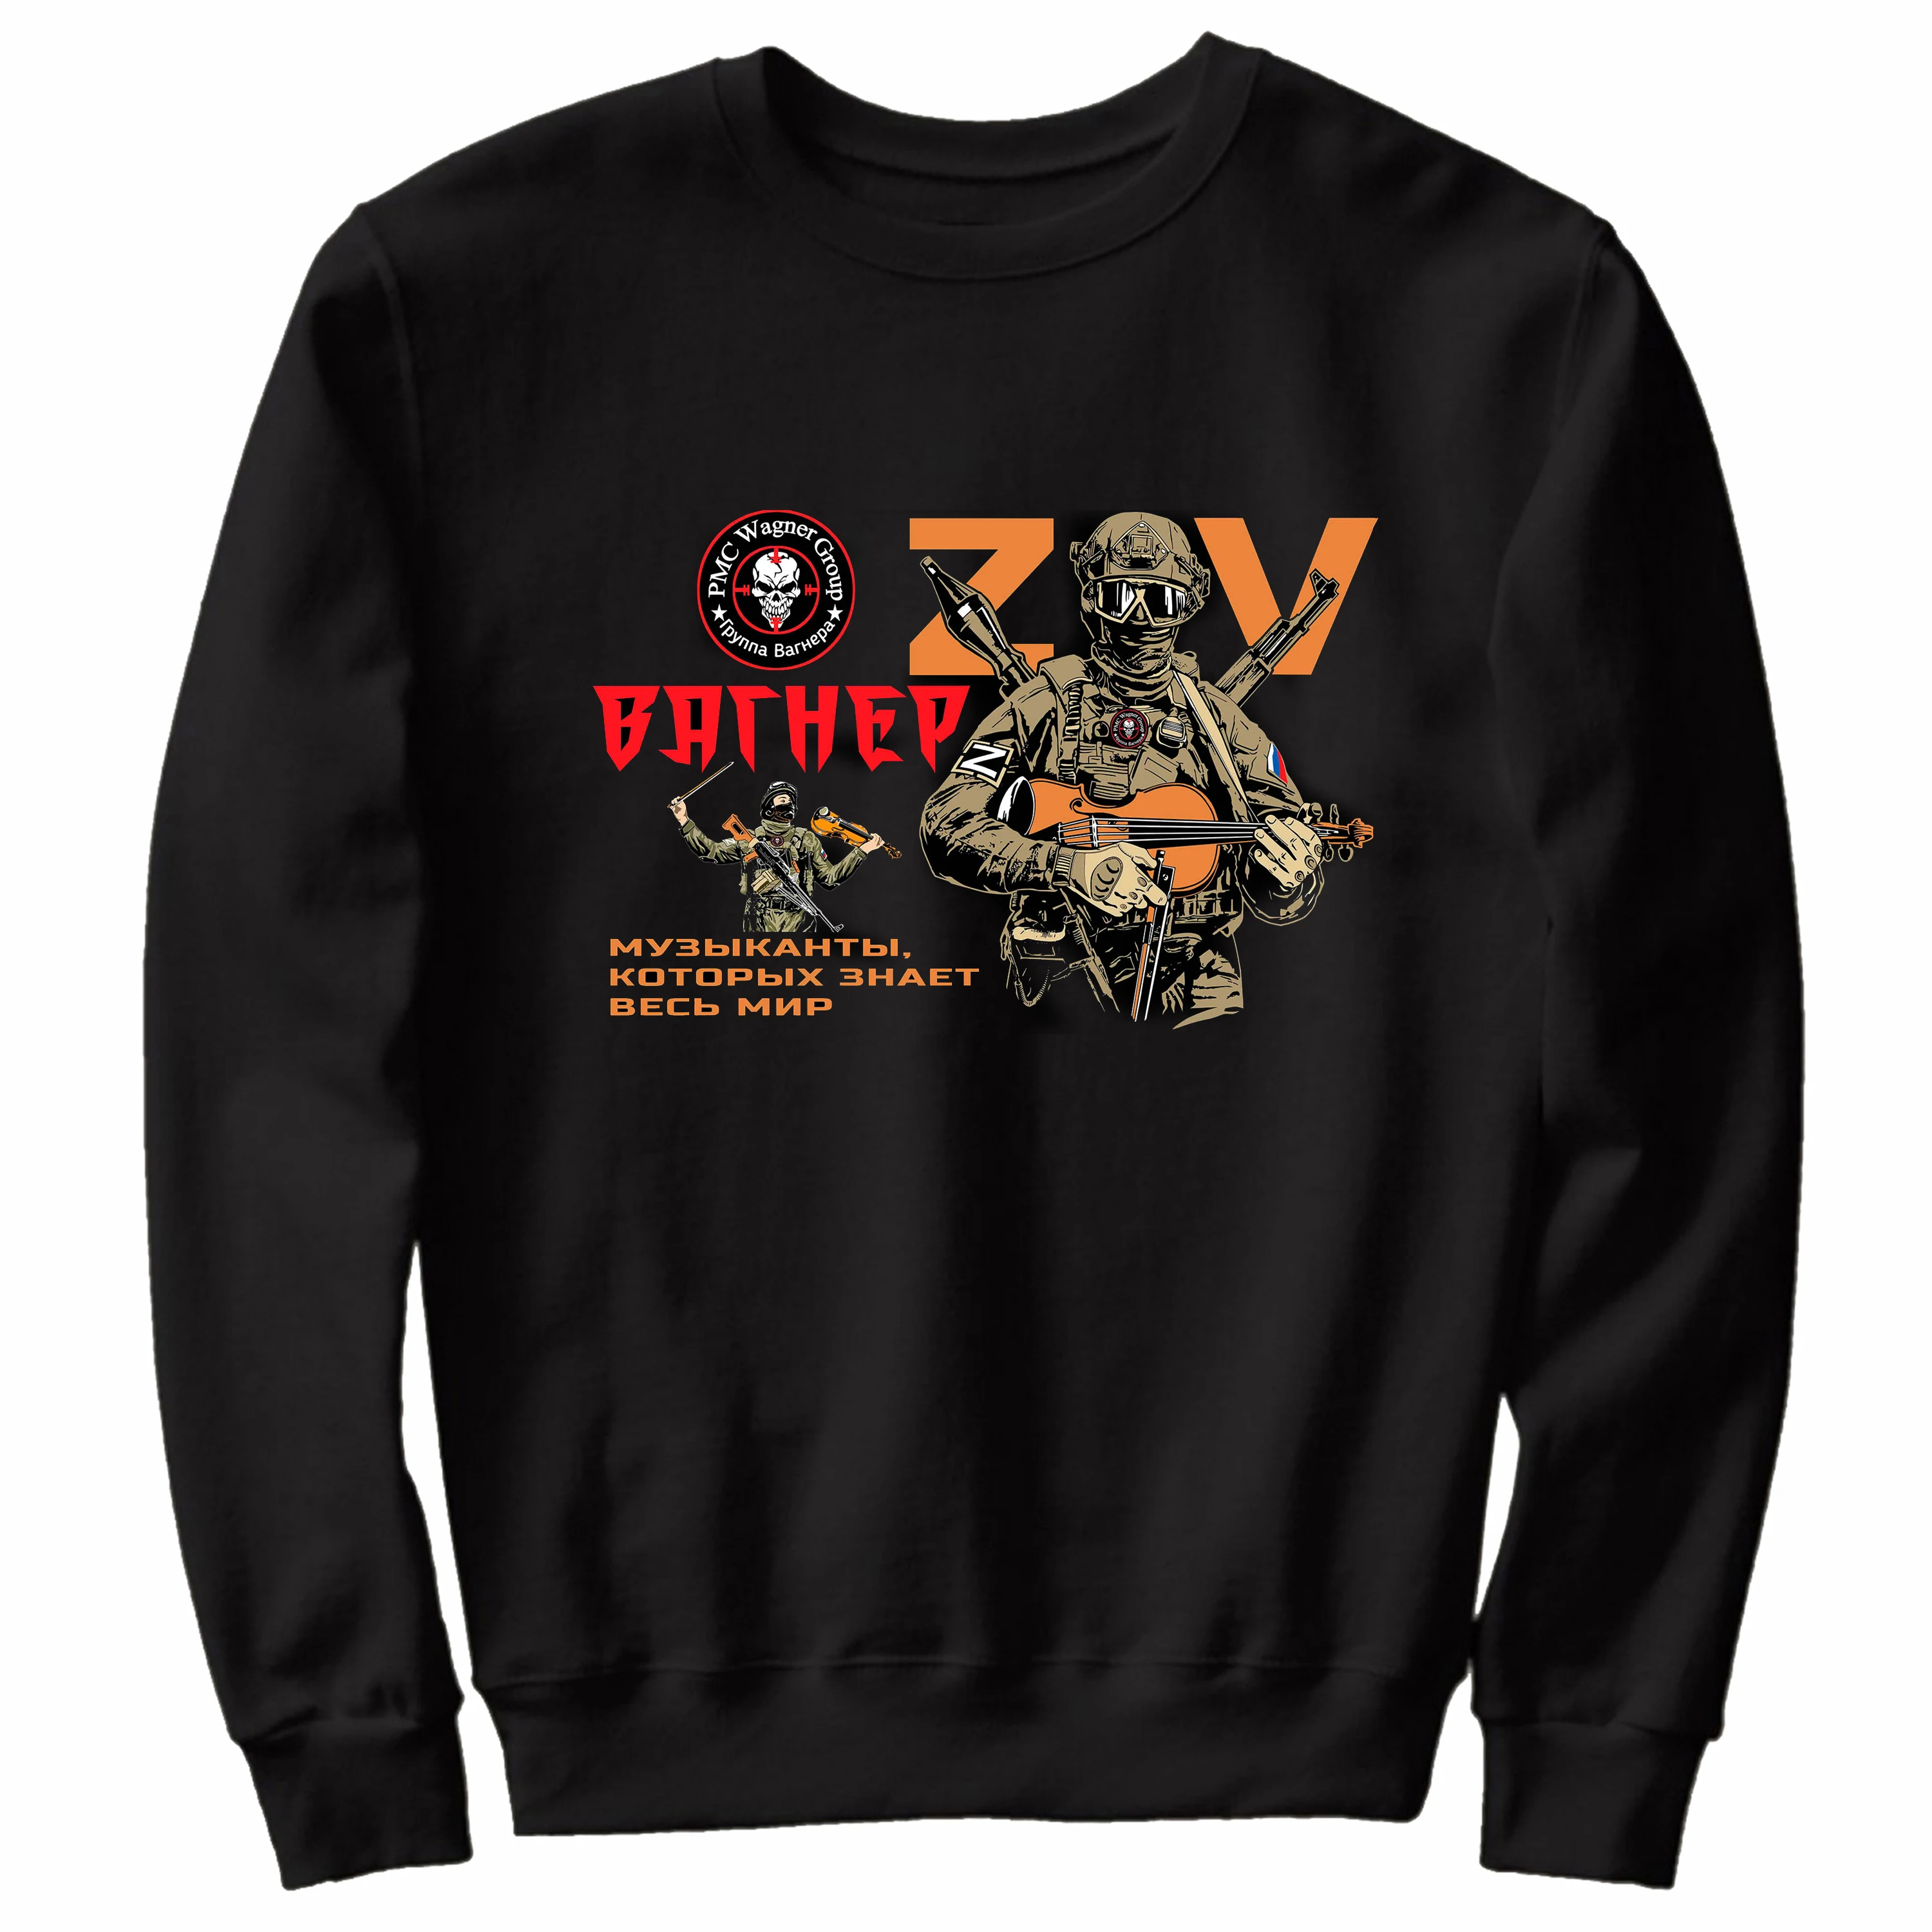 

Russian Wagner Group Soldier Military Musician Warrior Sweatshirts New 100% Cotton Comfortable Casual Mens Streetwear